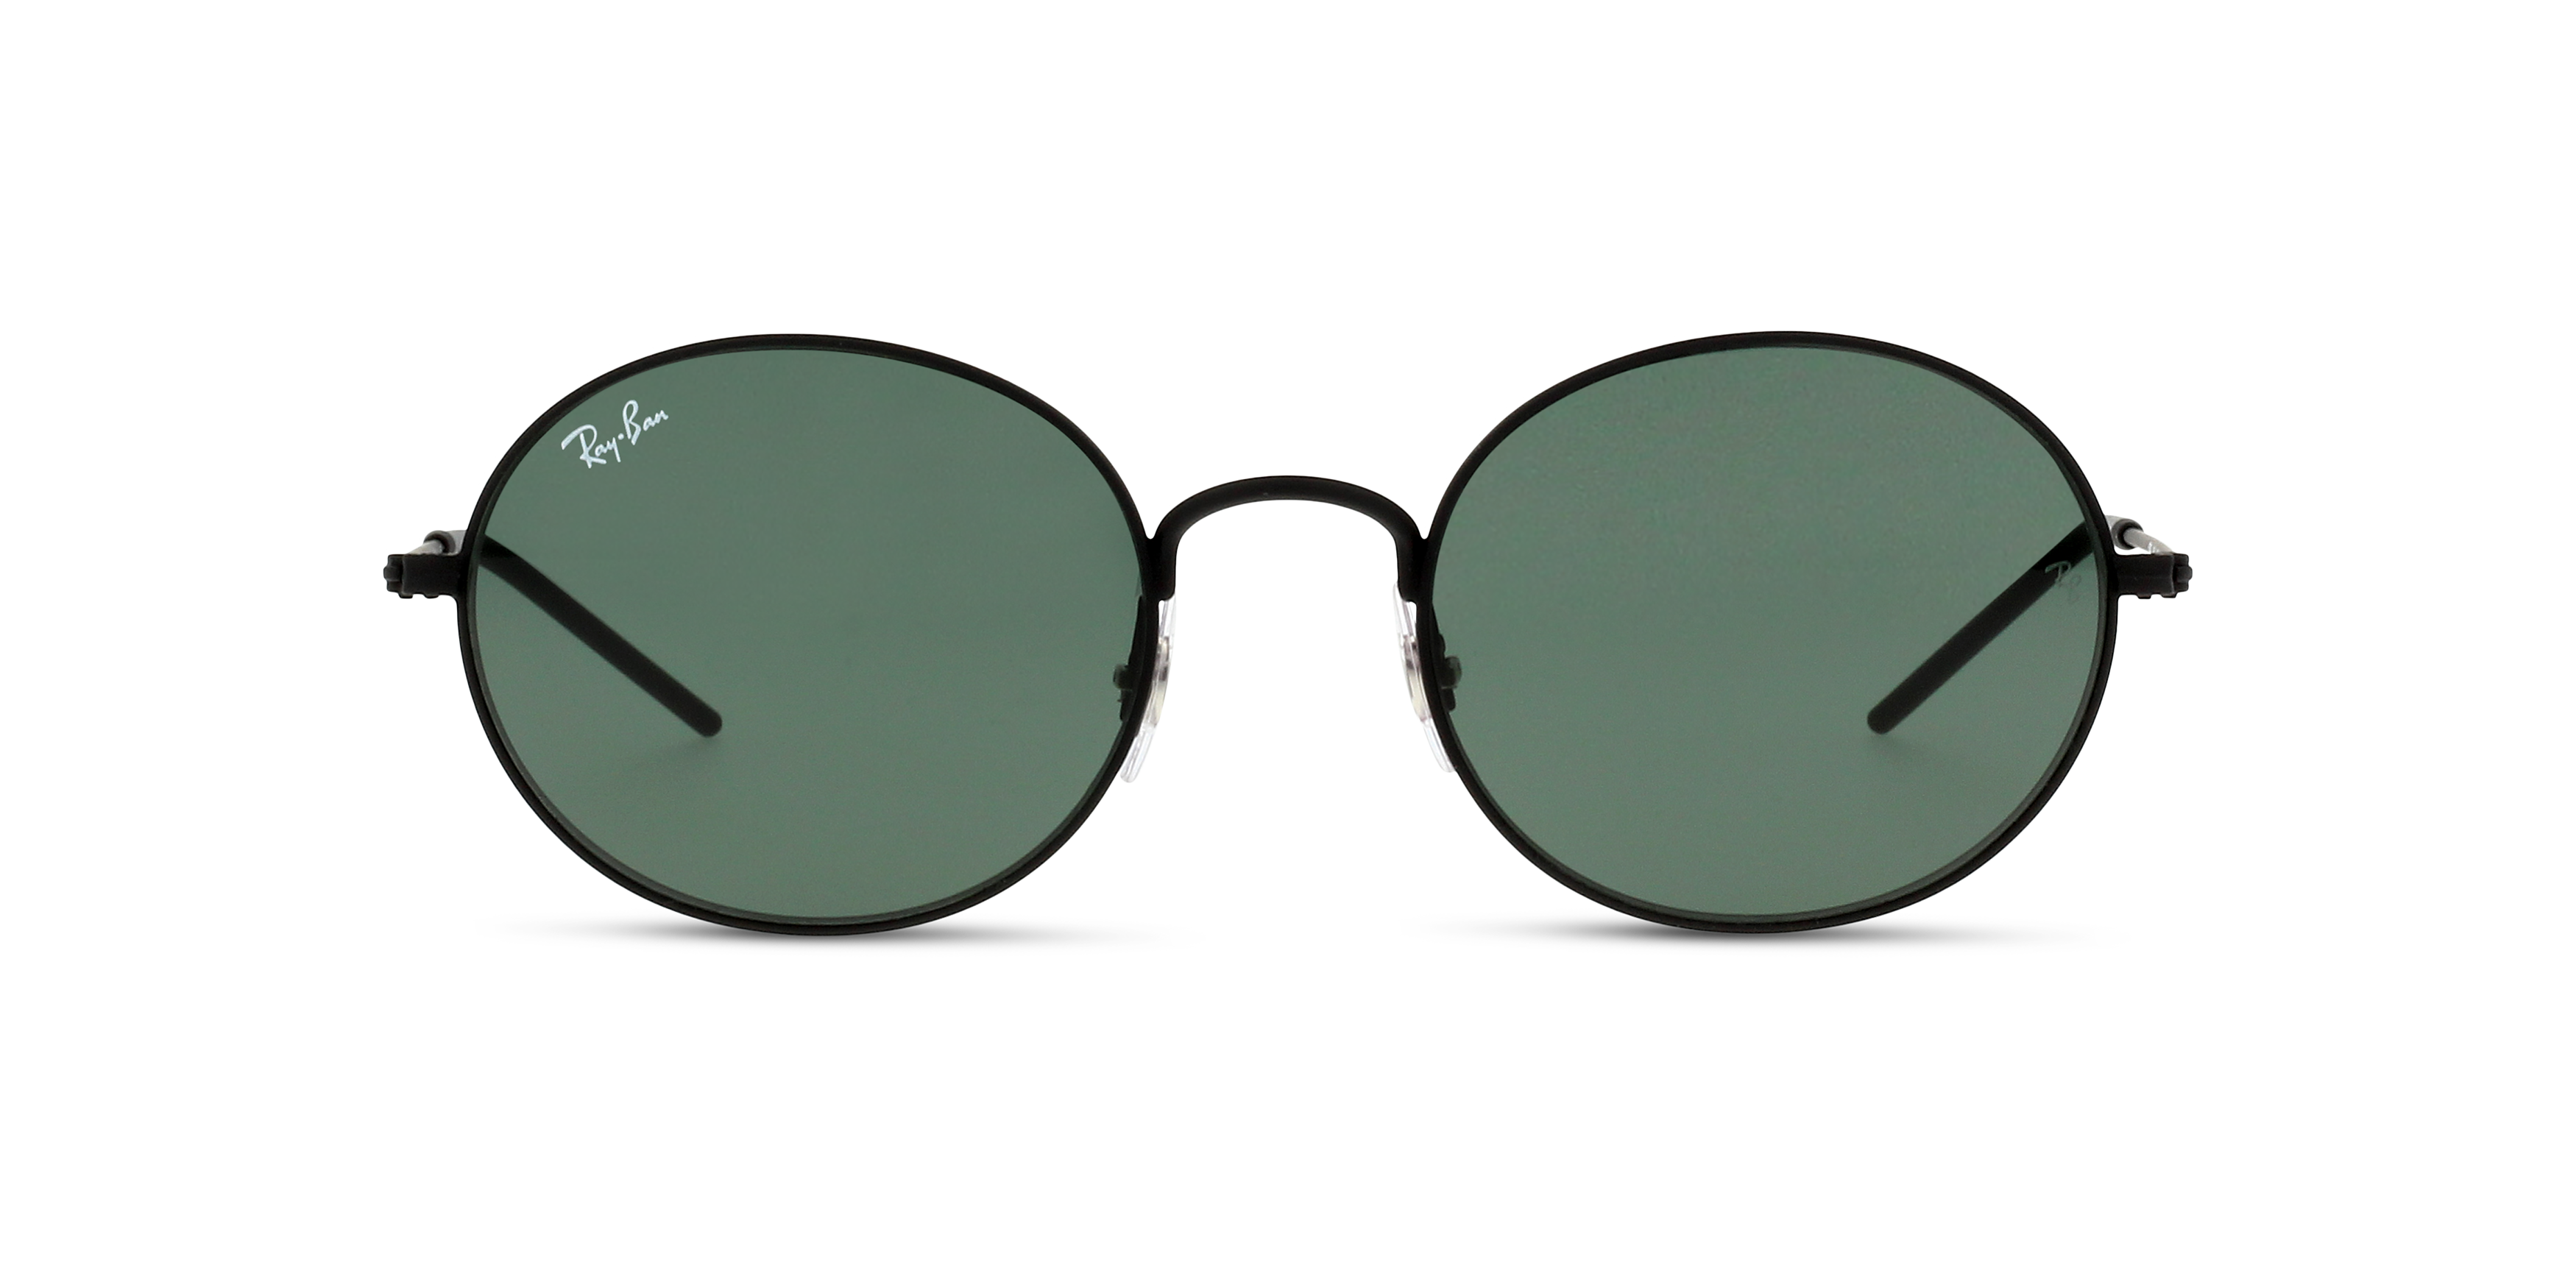 [products.image.front] Ray-Ban Beat RB3594 901471